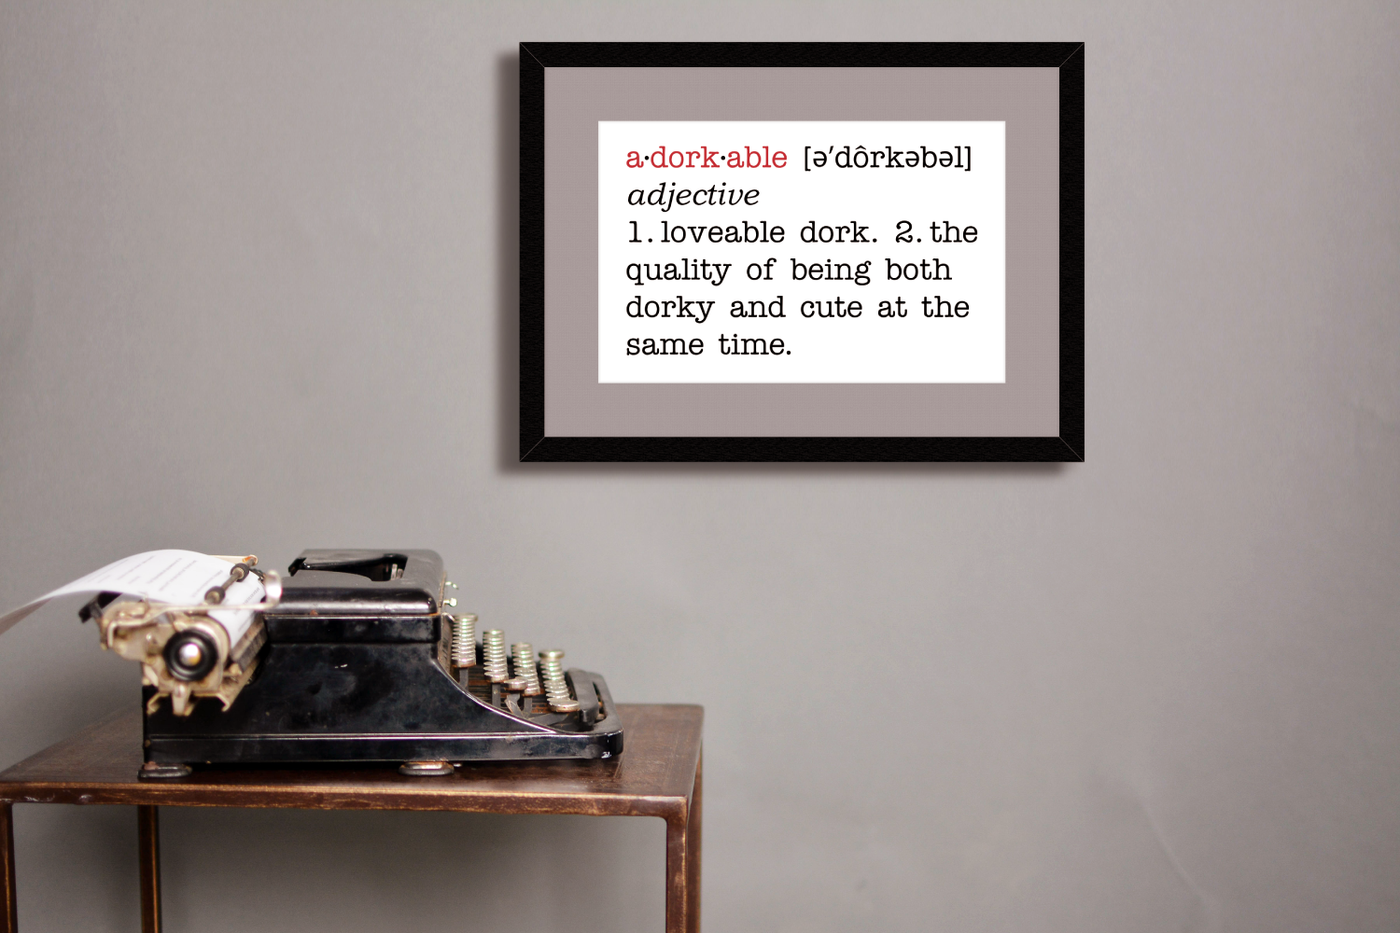 A framed poster on a grey wall above a table with a typewriter. The poster looks like a dictionary definition and says "adorkable. adjective. 1. loveable dork. 2. the quality of being both dorky and cute at the same time."